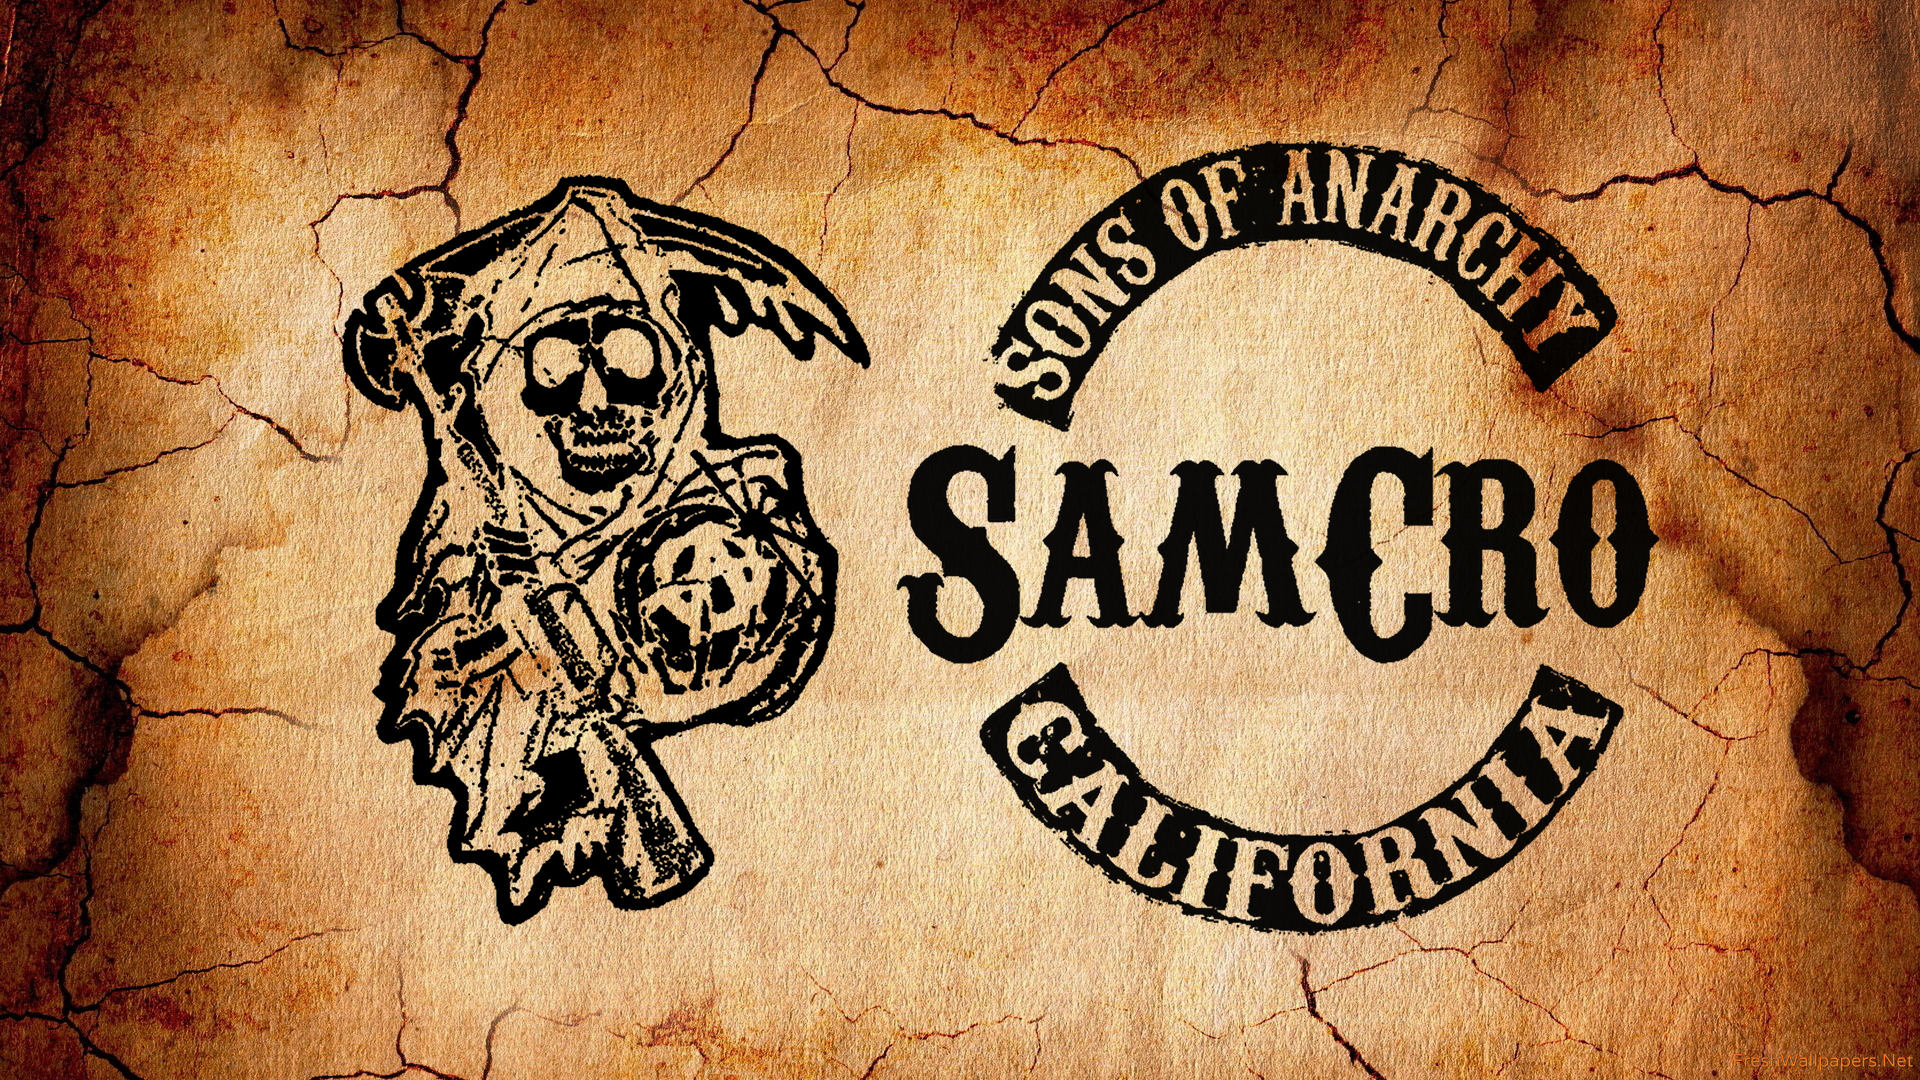 Sons Of Anarchy Iphone Wallpaper Hd - HD Wallpaper 